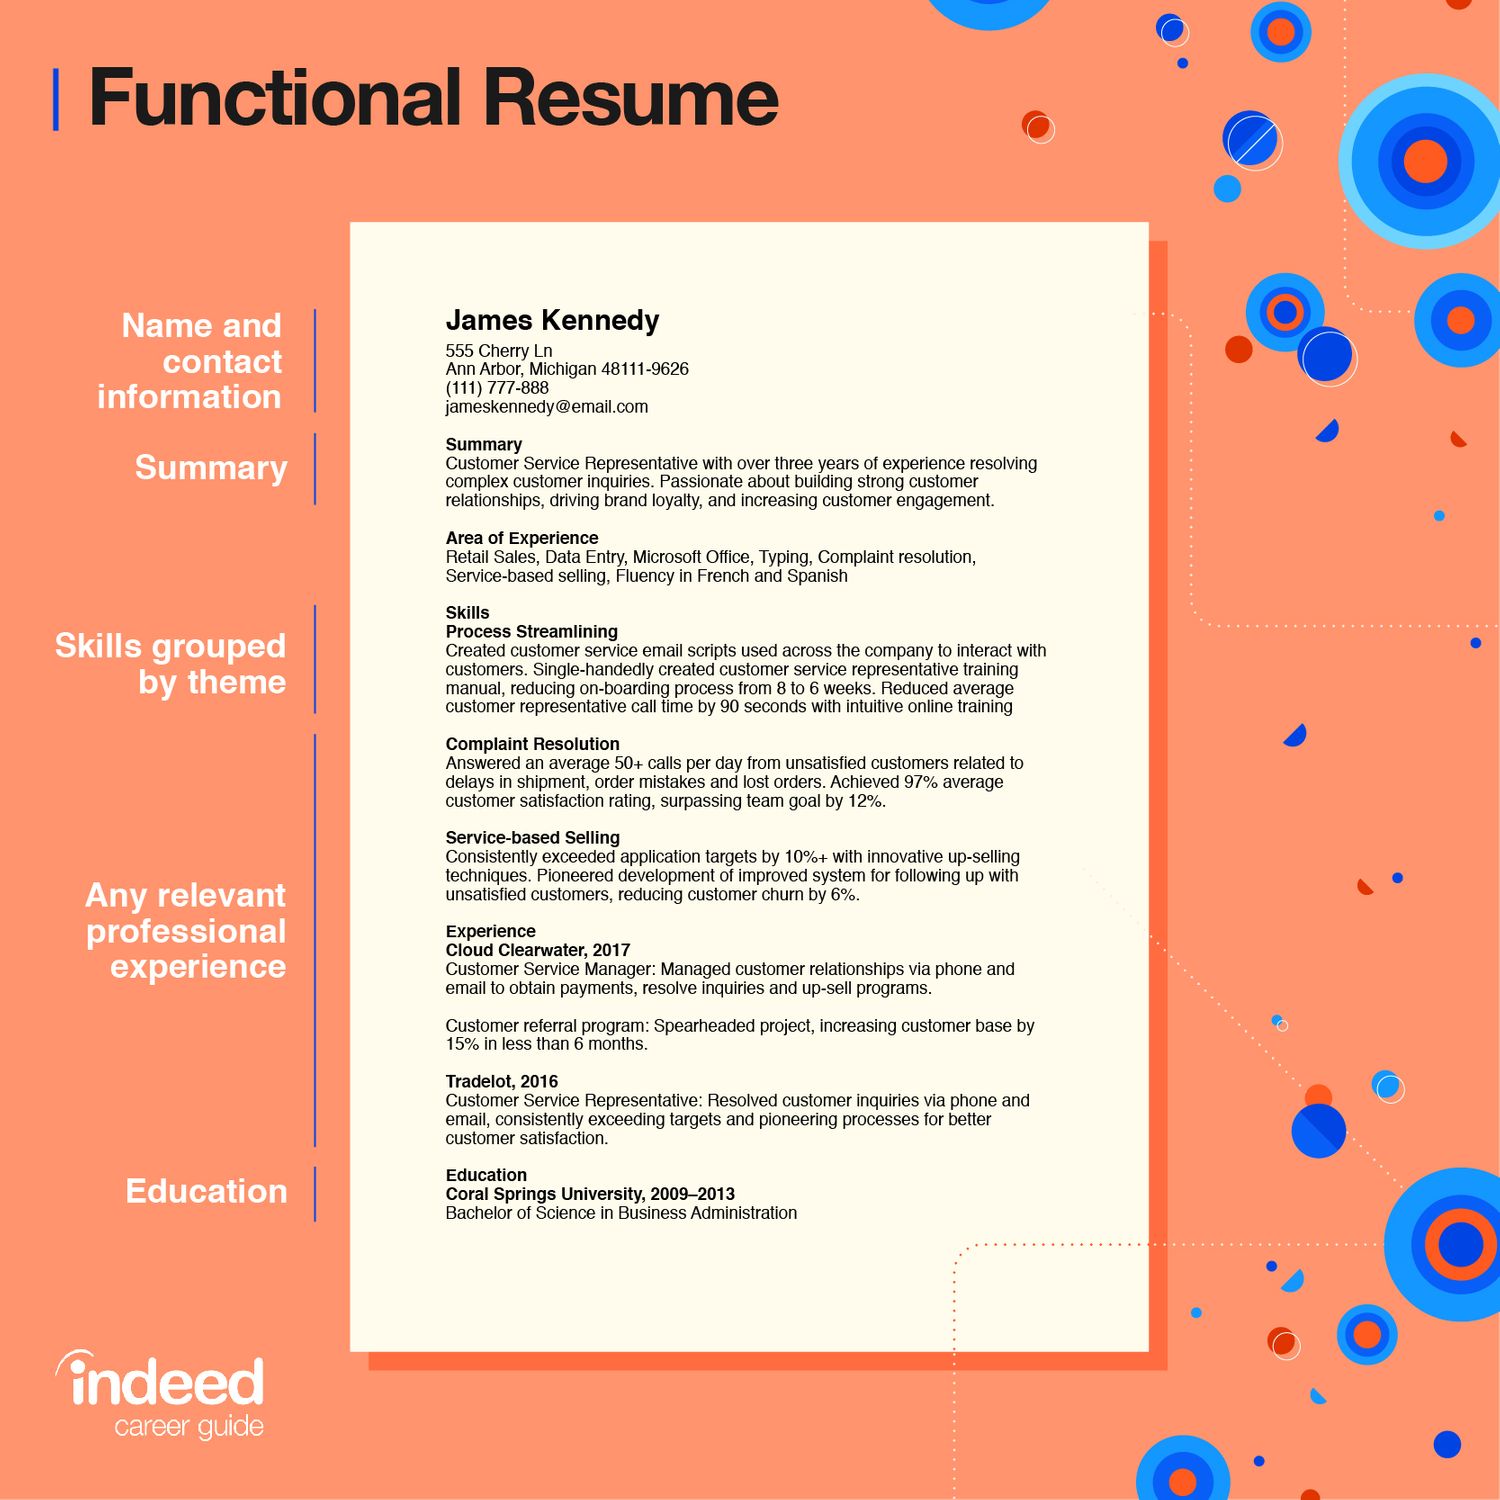 Functional Resume: Definition, Tips | Indeed.com